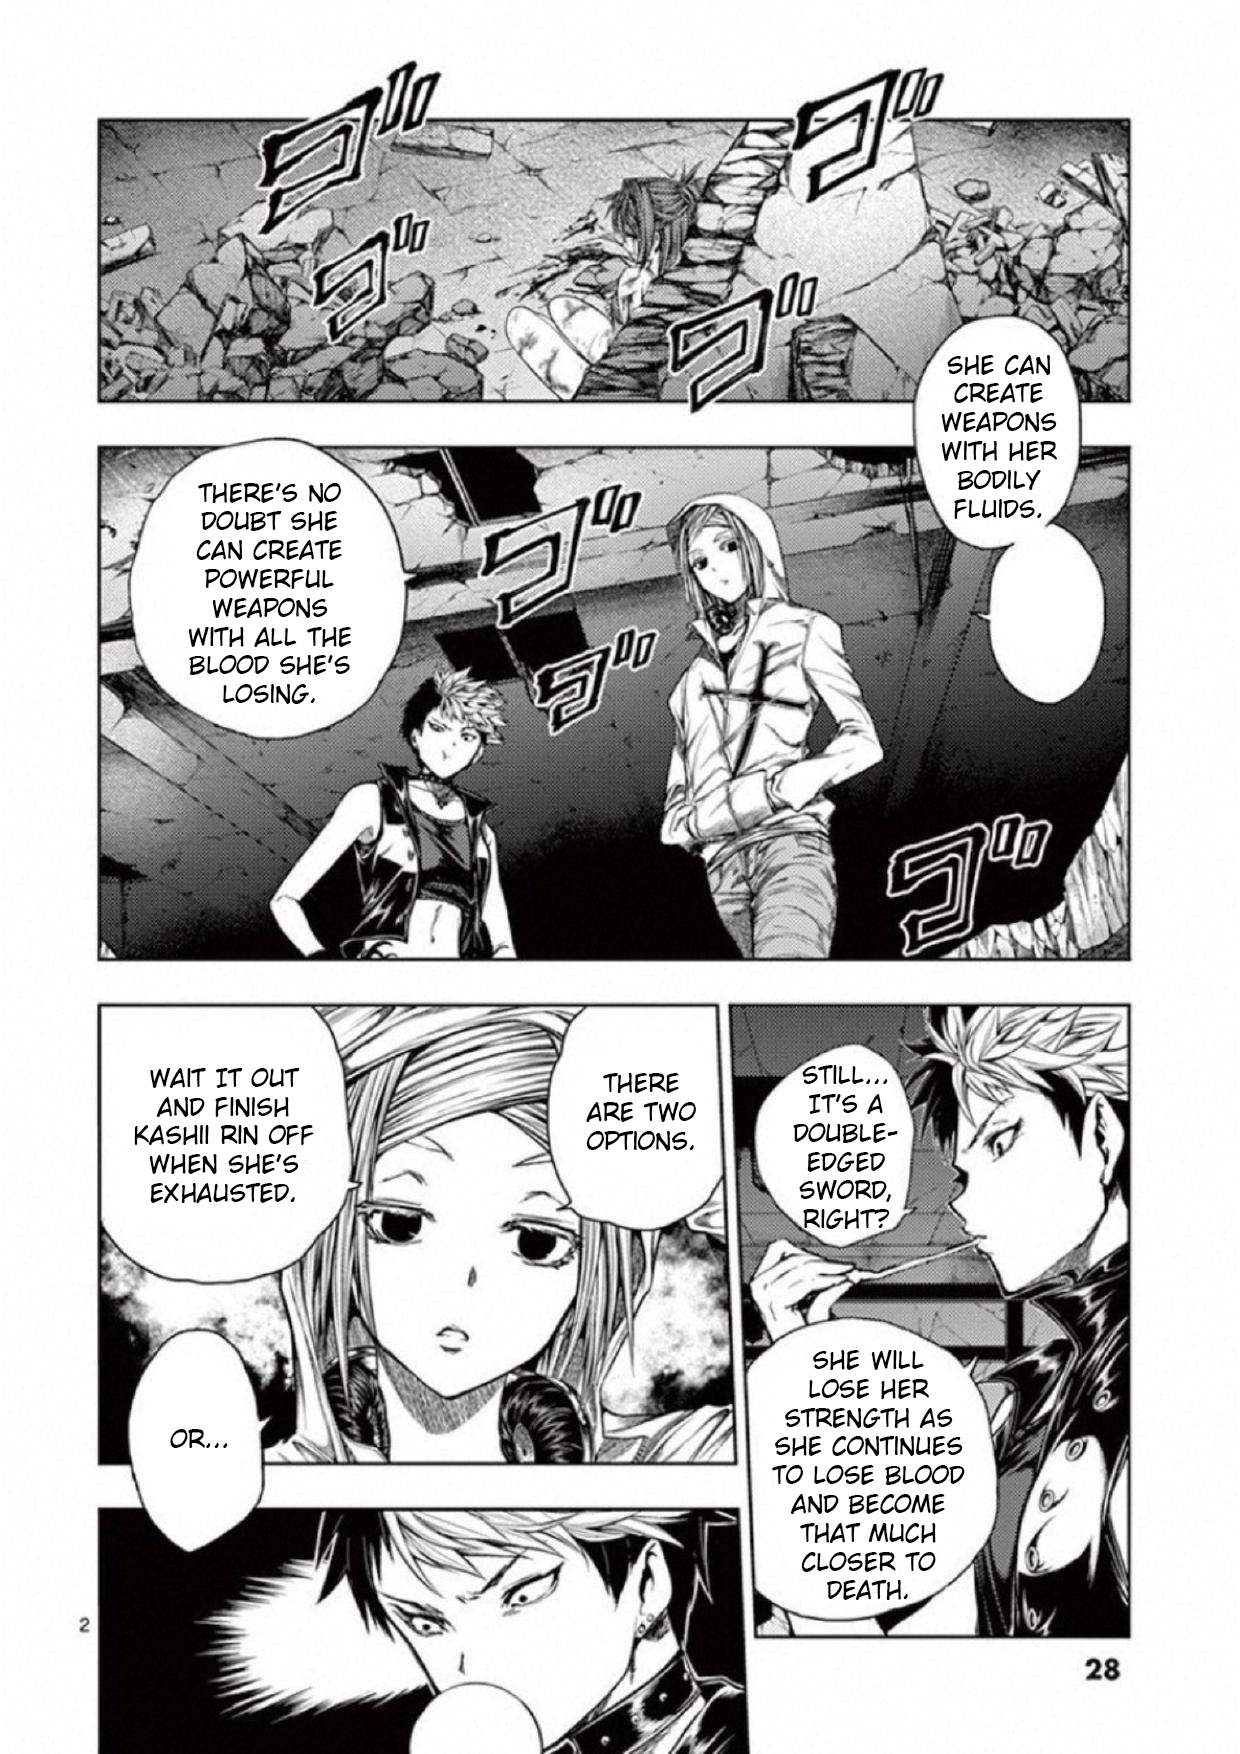 Start Fighting 5 Seconds After Meeting - Page 2